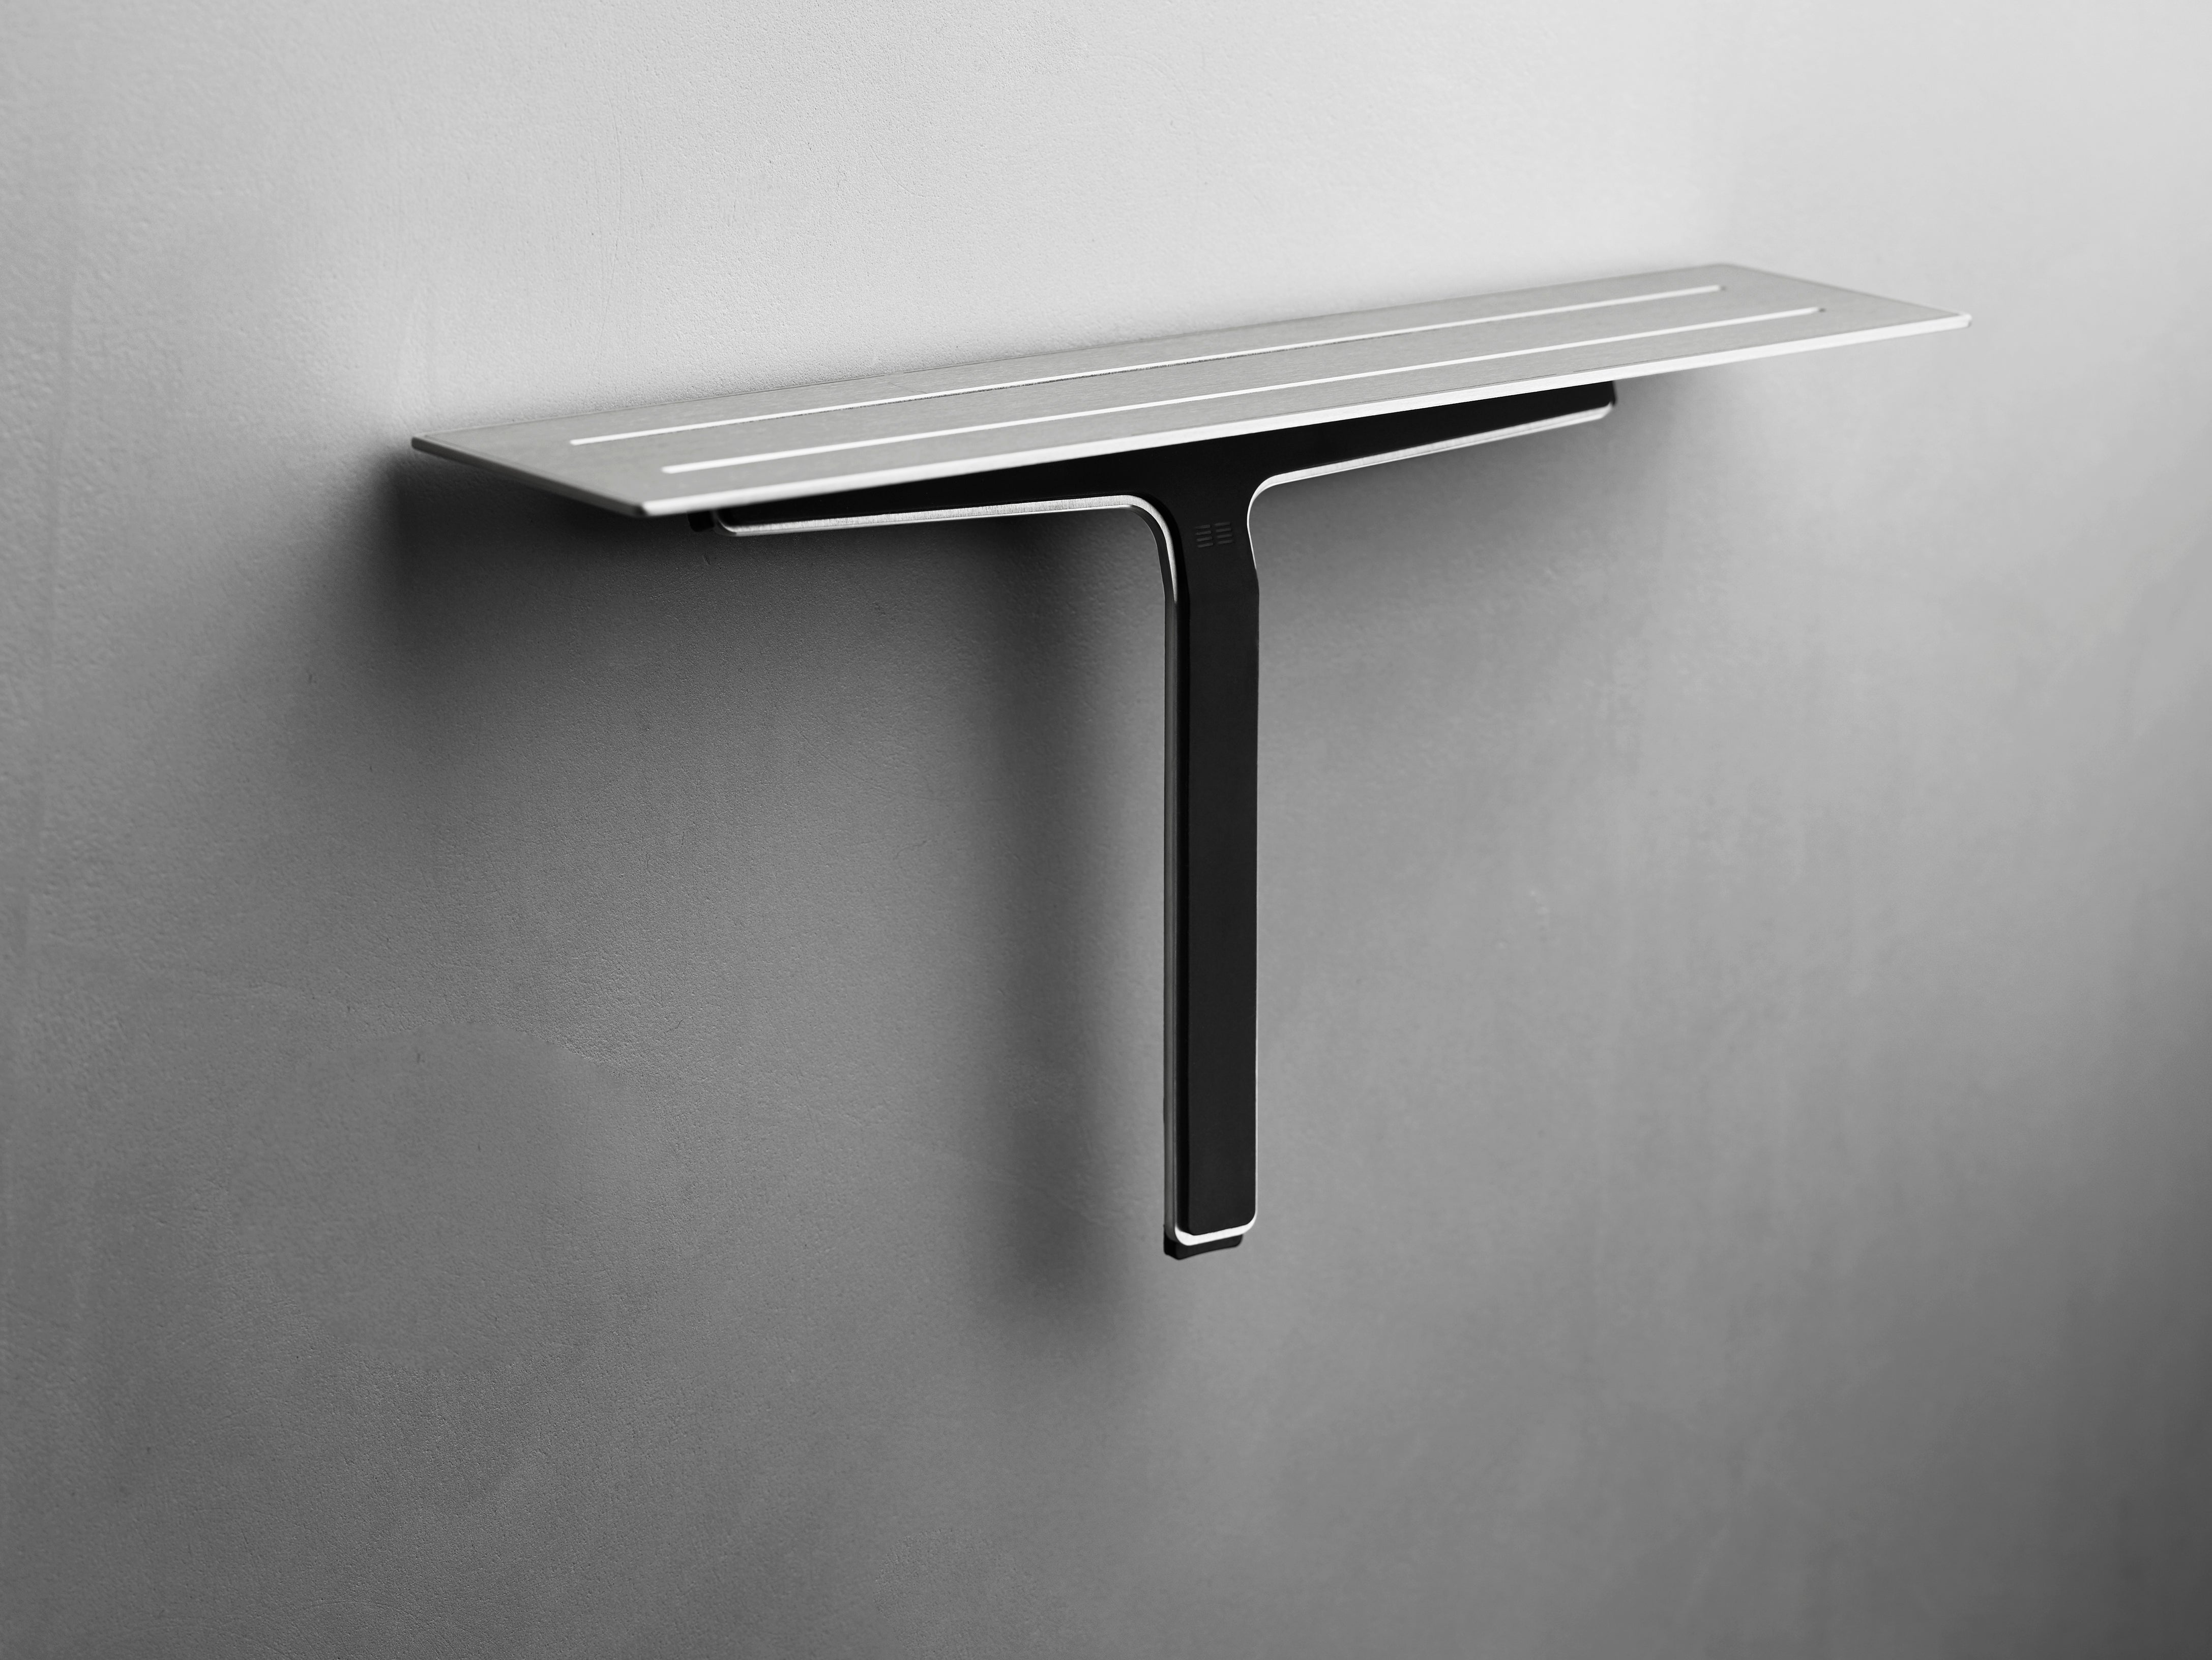 Unidrain Reframe Shower tray & Wiper - brushed stainless steel